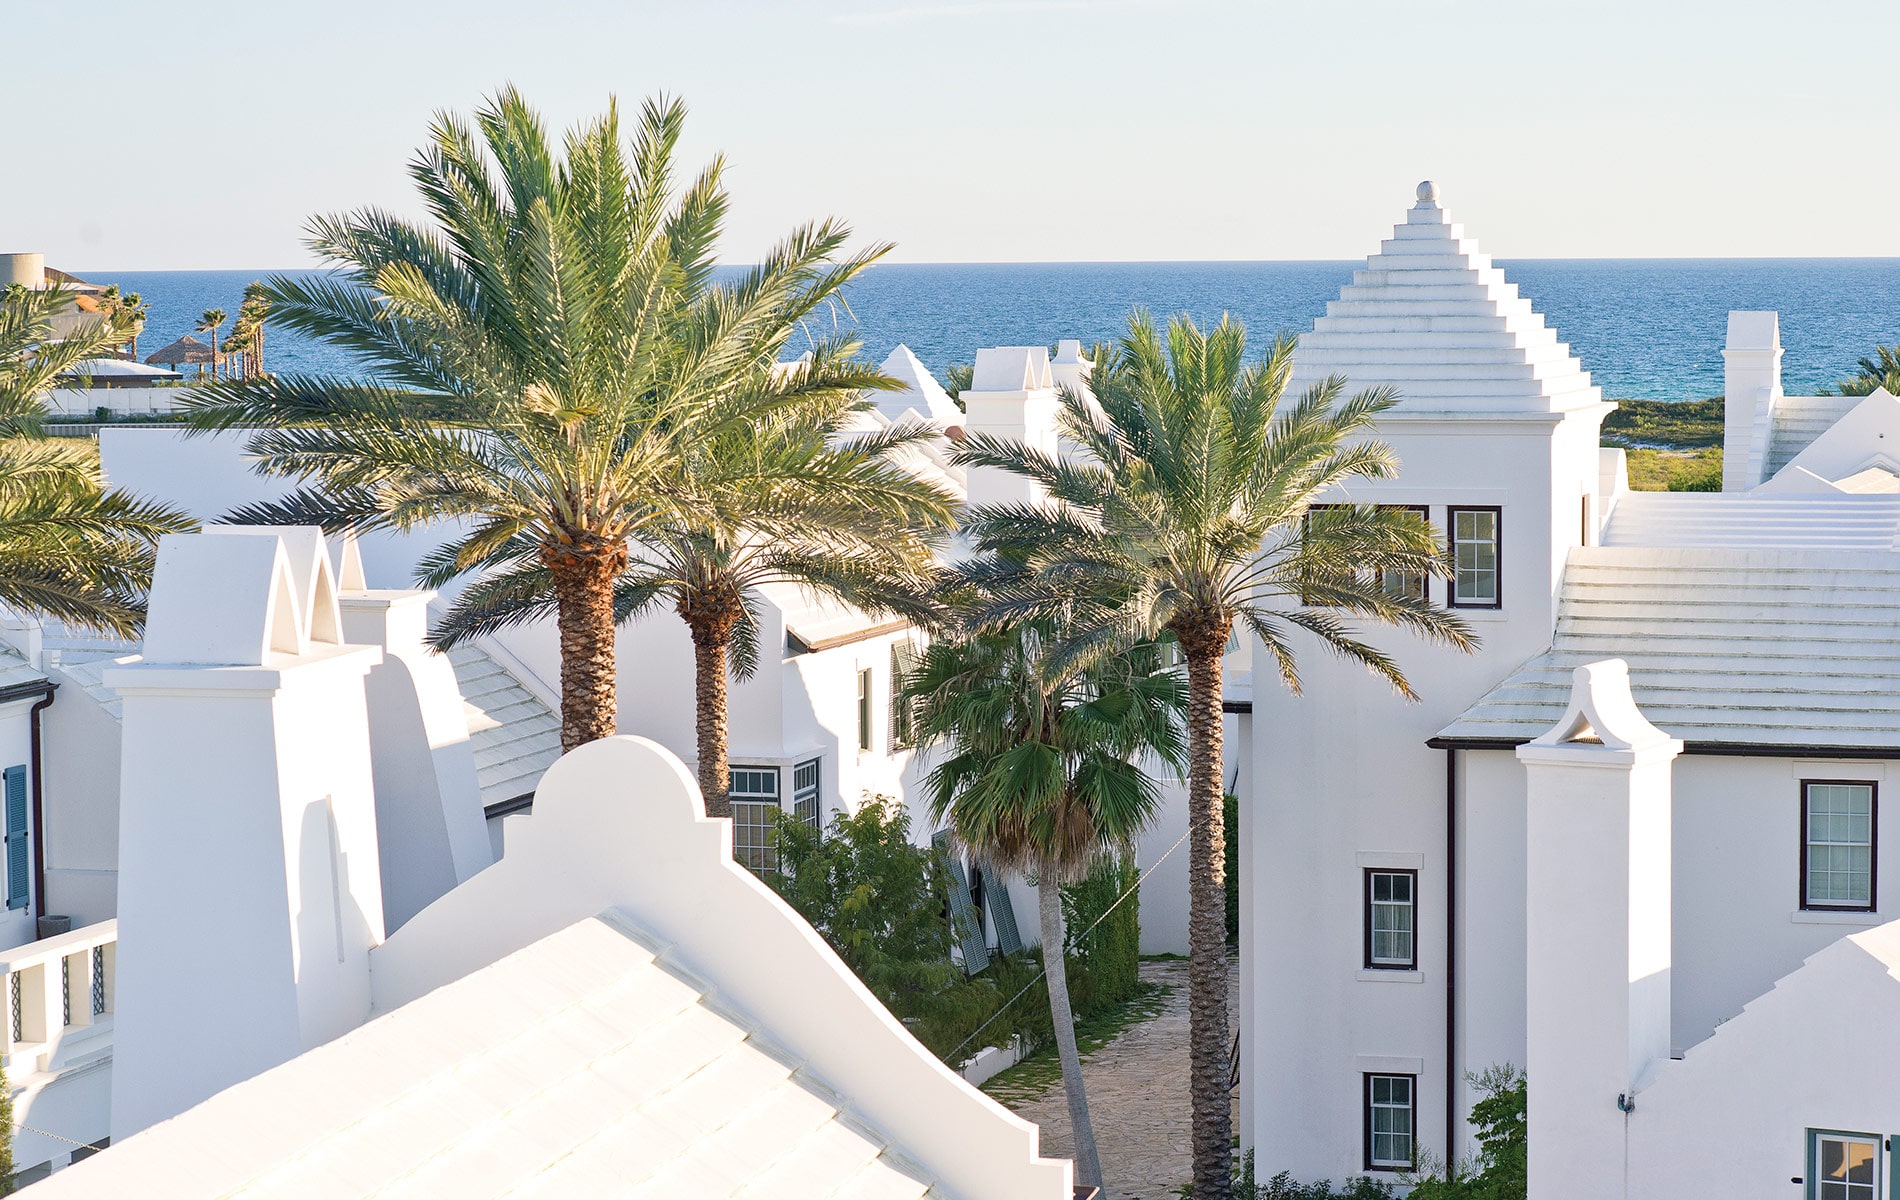 Alys Beach, Florida, is known as one of the most luxurious and exclusive communities along the corridor of Scenic Highway 30-A.